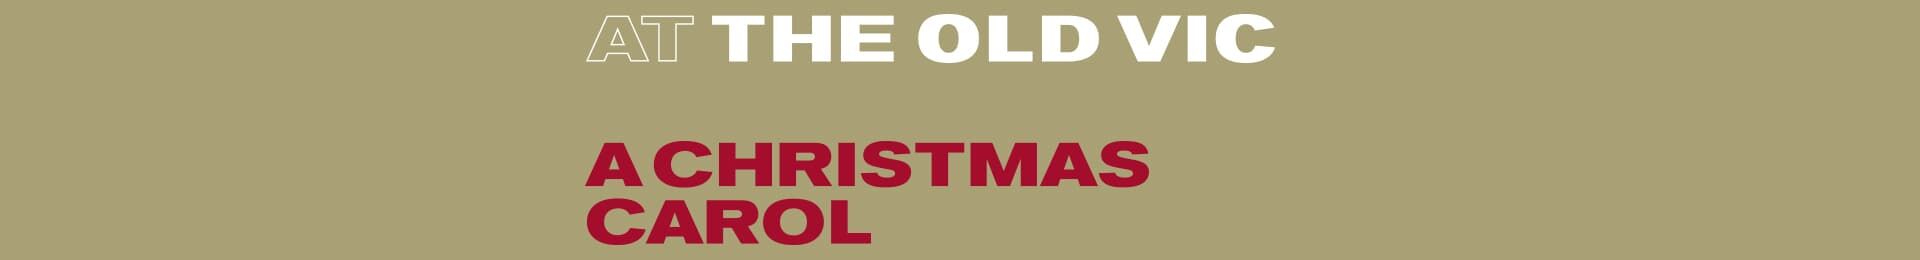 First Look: A Christmas Carol at The Old Vic Theatre for #OVSeason5 ...